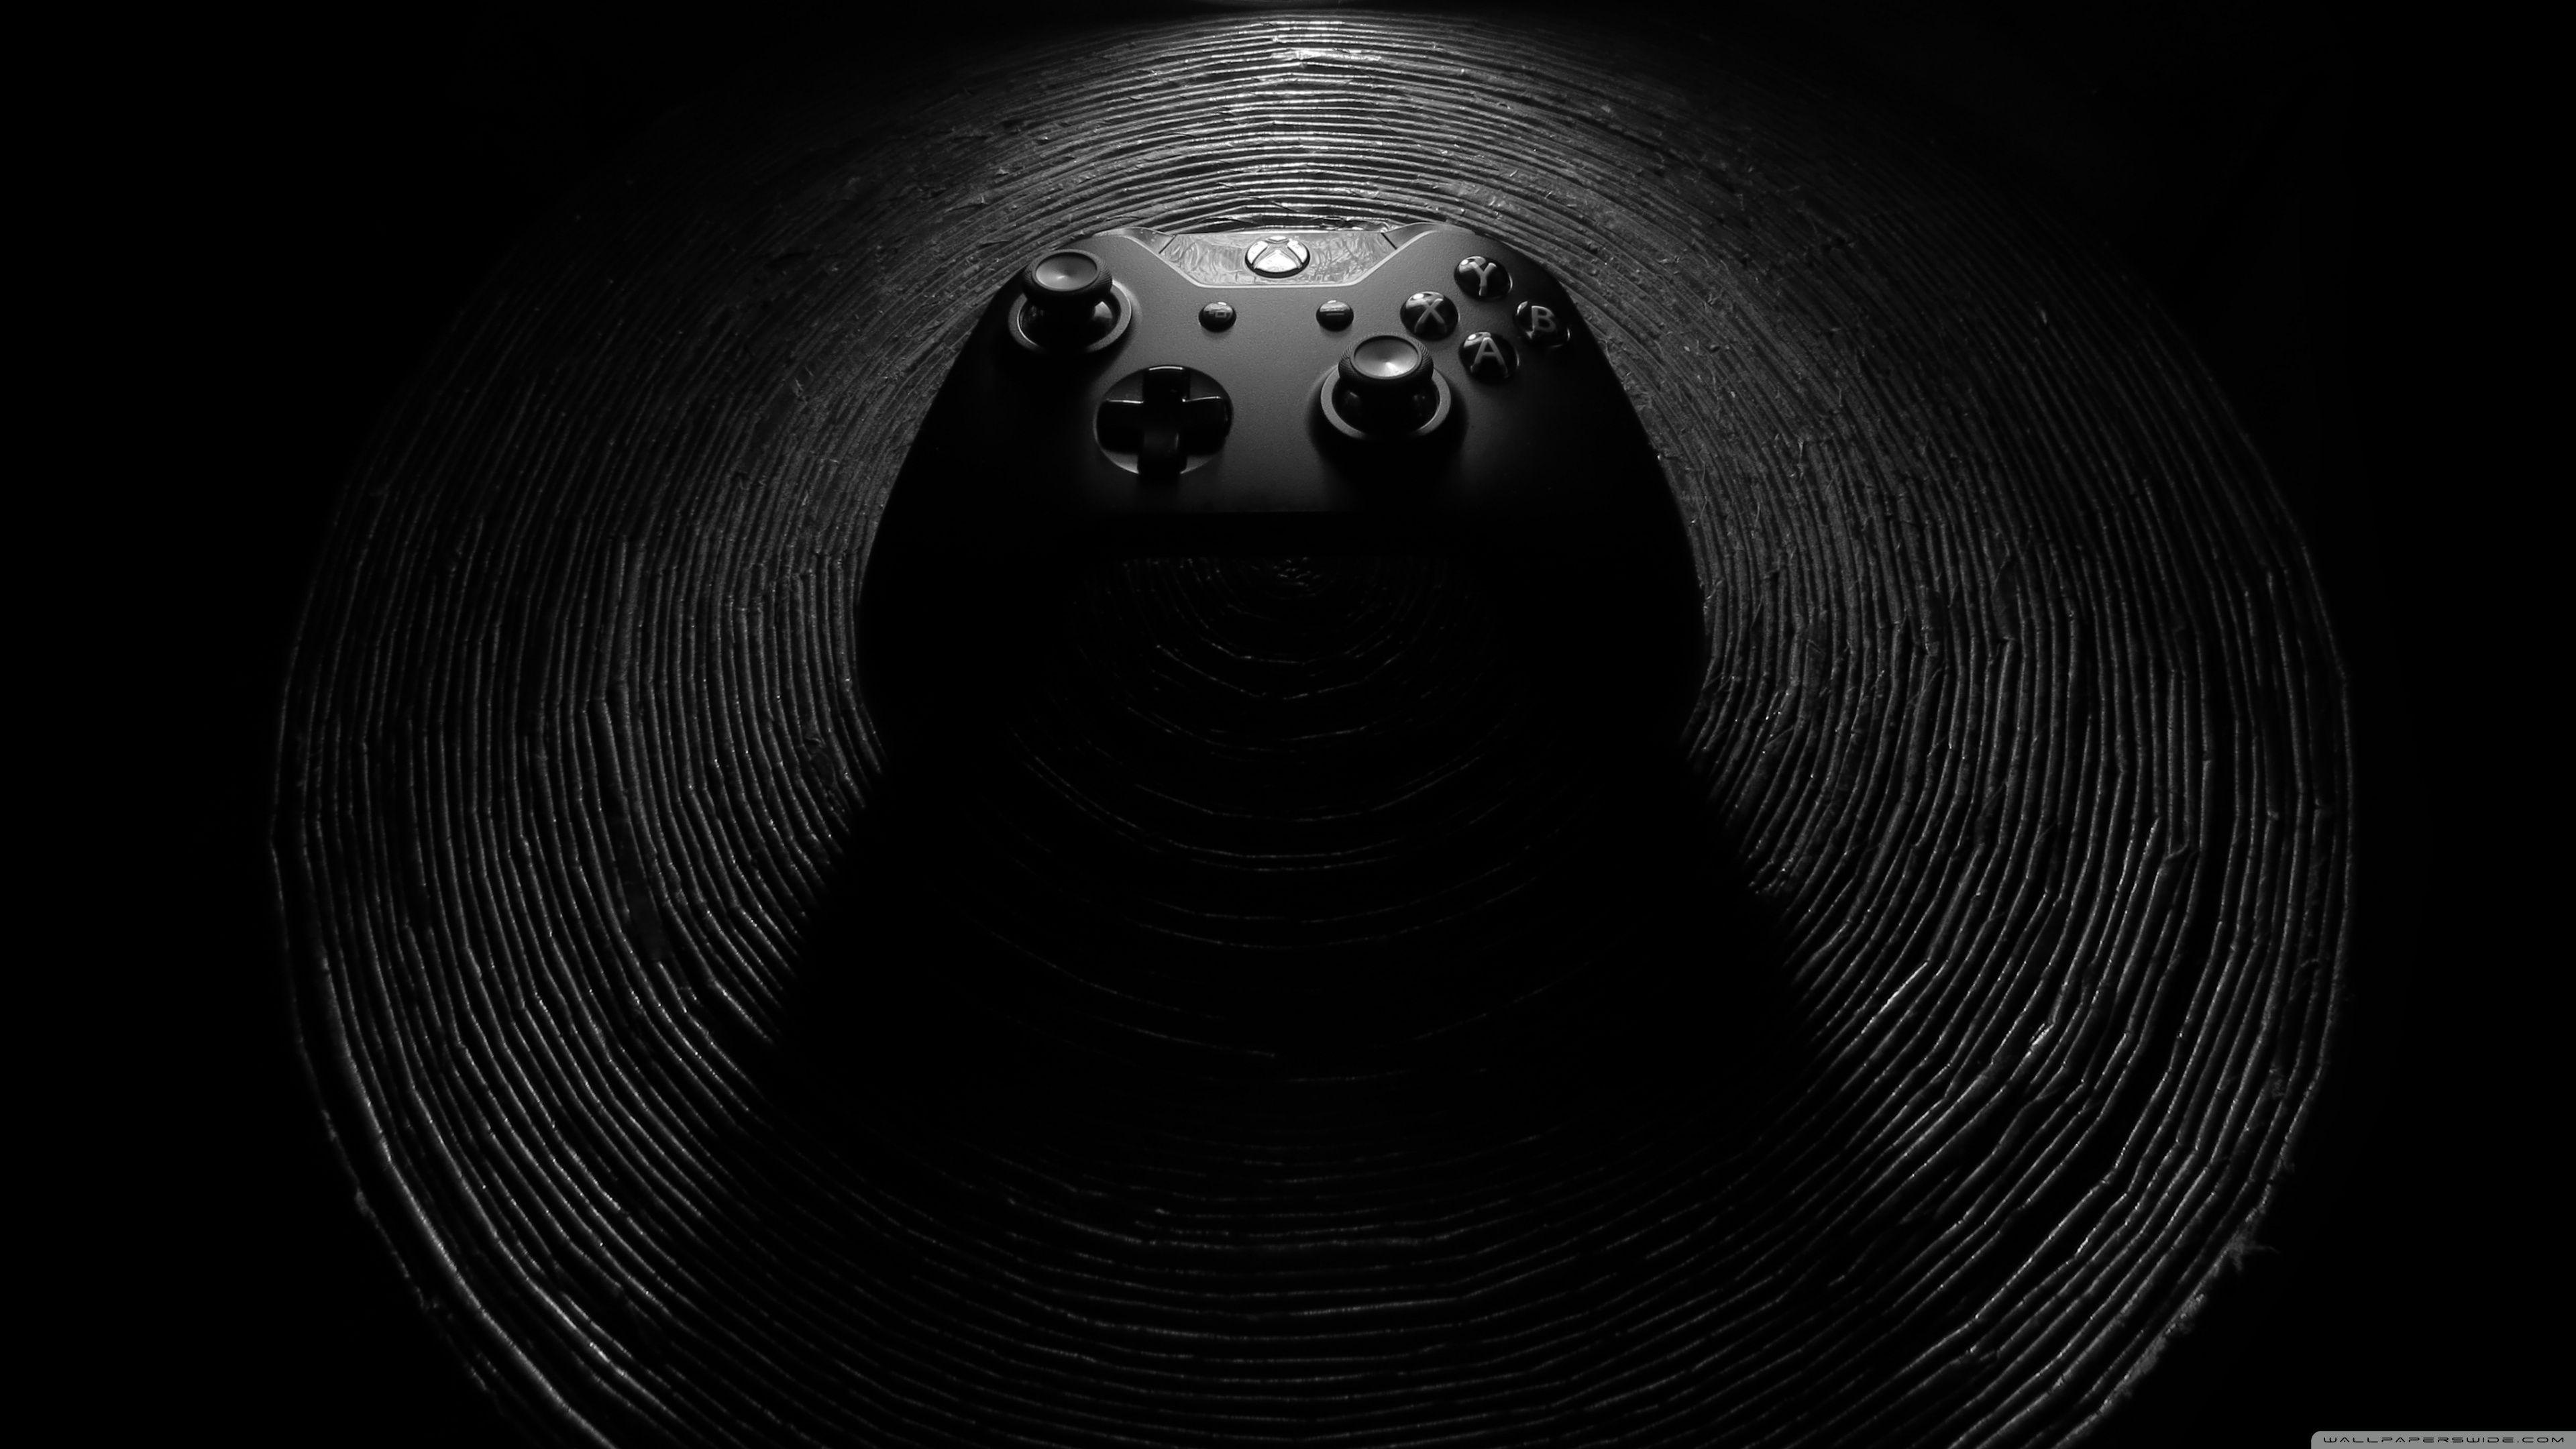 Xbox One 4K Wallpapers - Top Free Xbox One 4K Backgrounds 